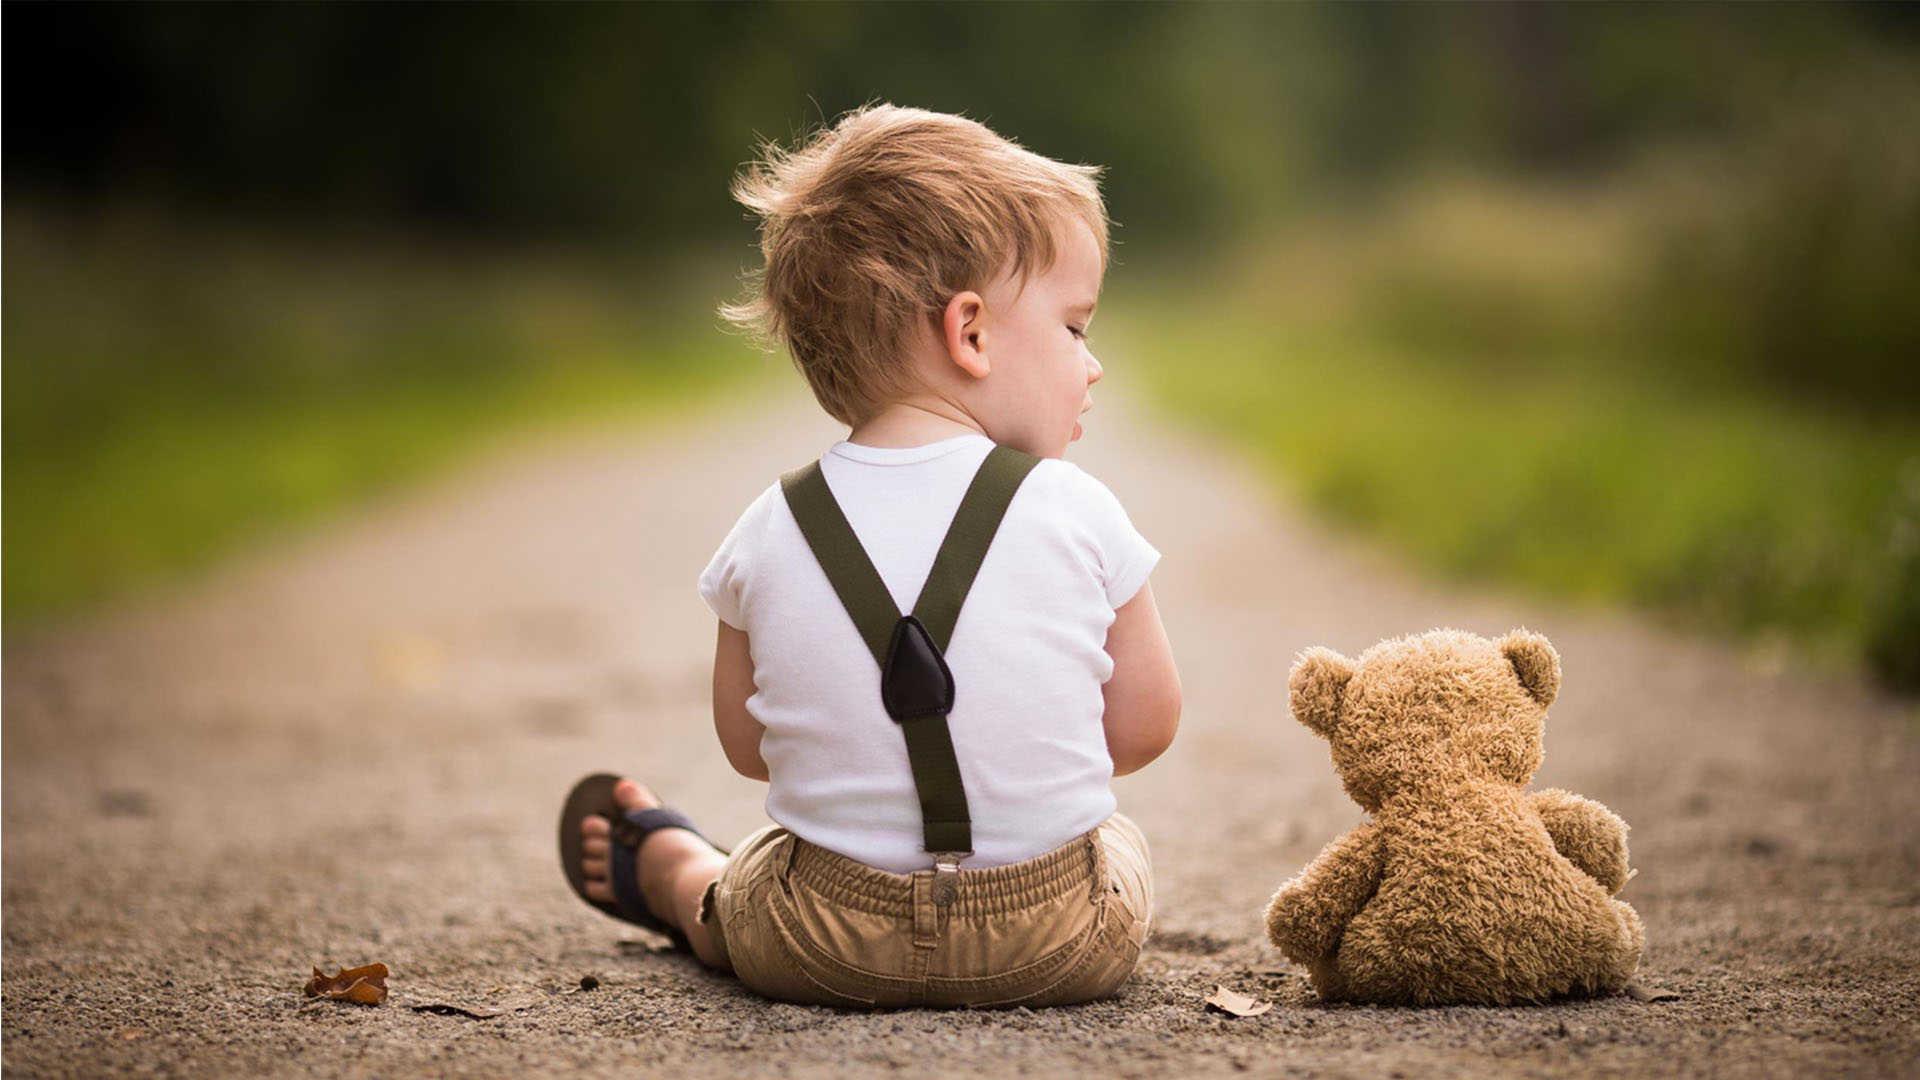 Ultimate Collection of Full 4K Wallpaper Cute Baby Boy Images: Over 999+  Amazing Shots